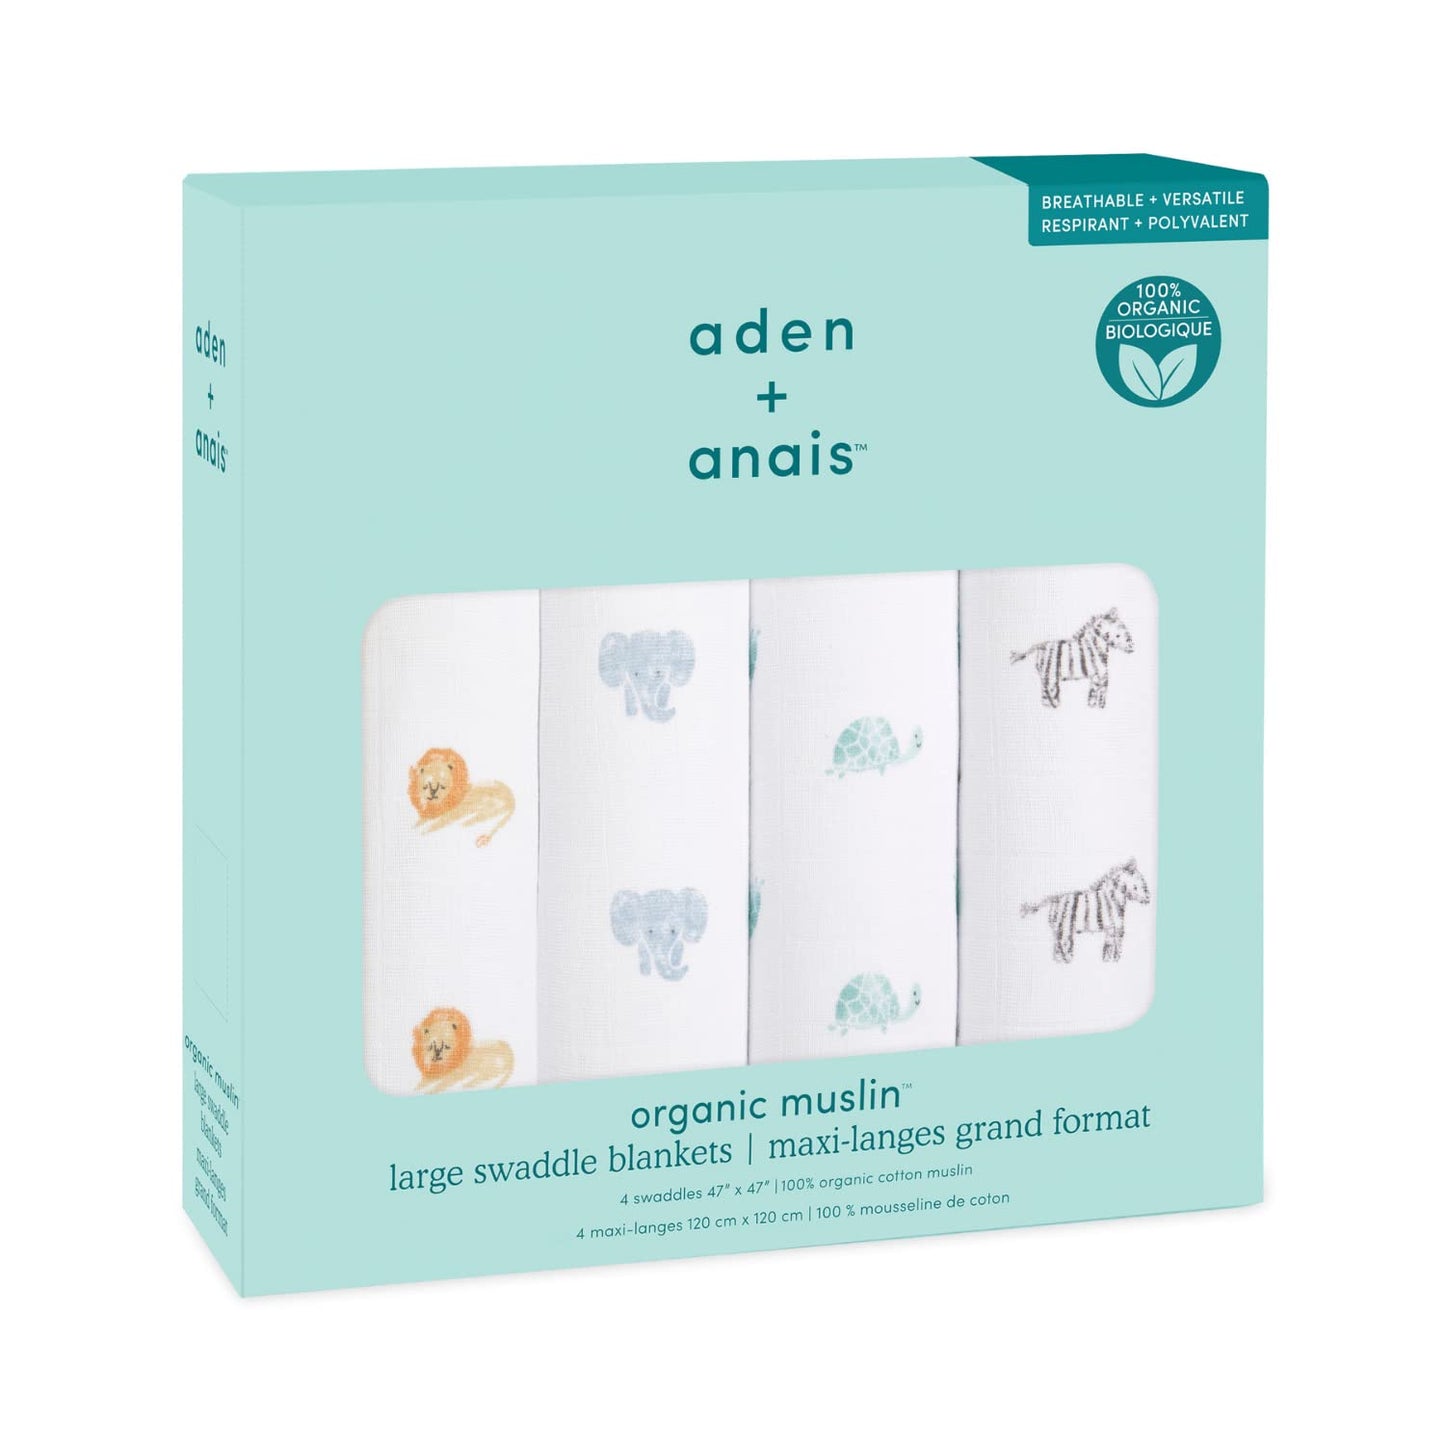 aden + anais 100% Organic Cotton Muslin Swaddle, GOTS Certified, Swaddle Receiving Blankets for Baby Girls & Boys, 120x120cm, Newborn & Infant Swaddling Wrap Set, Shower Gifts, 4 Pack, animal kingdom